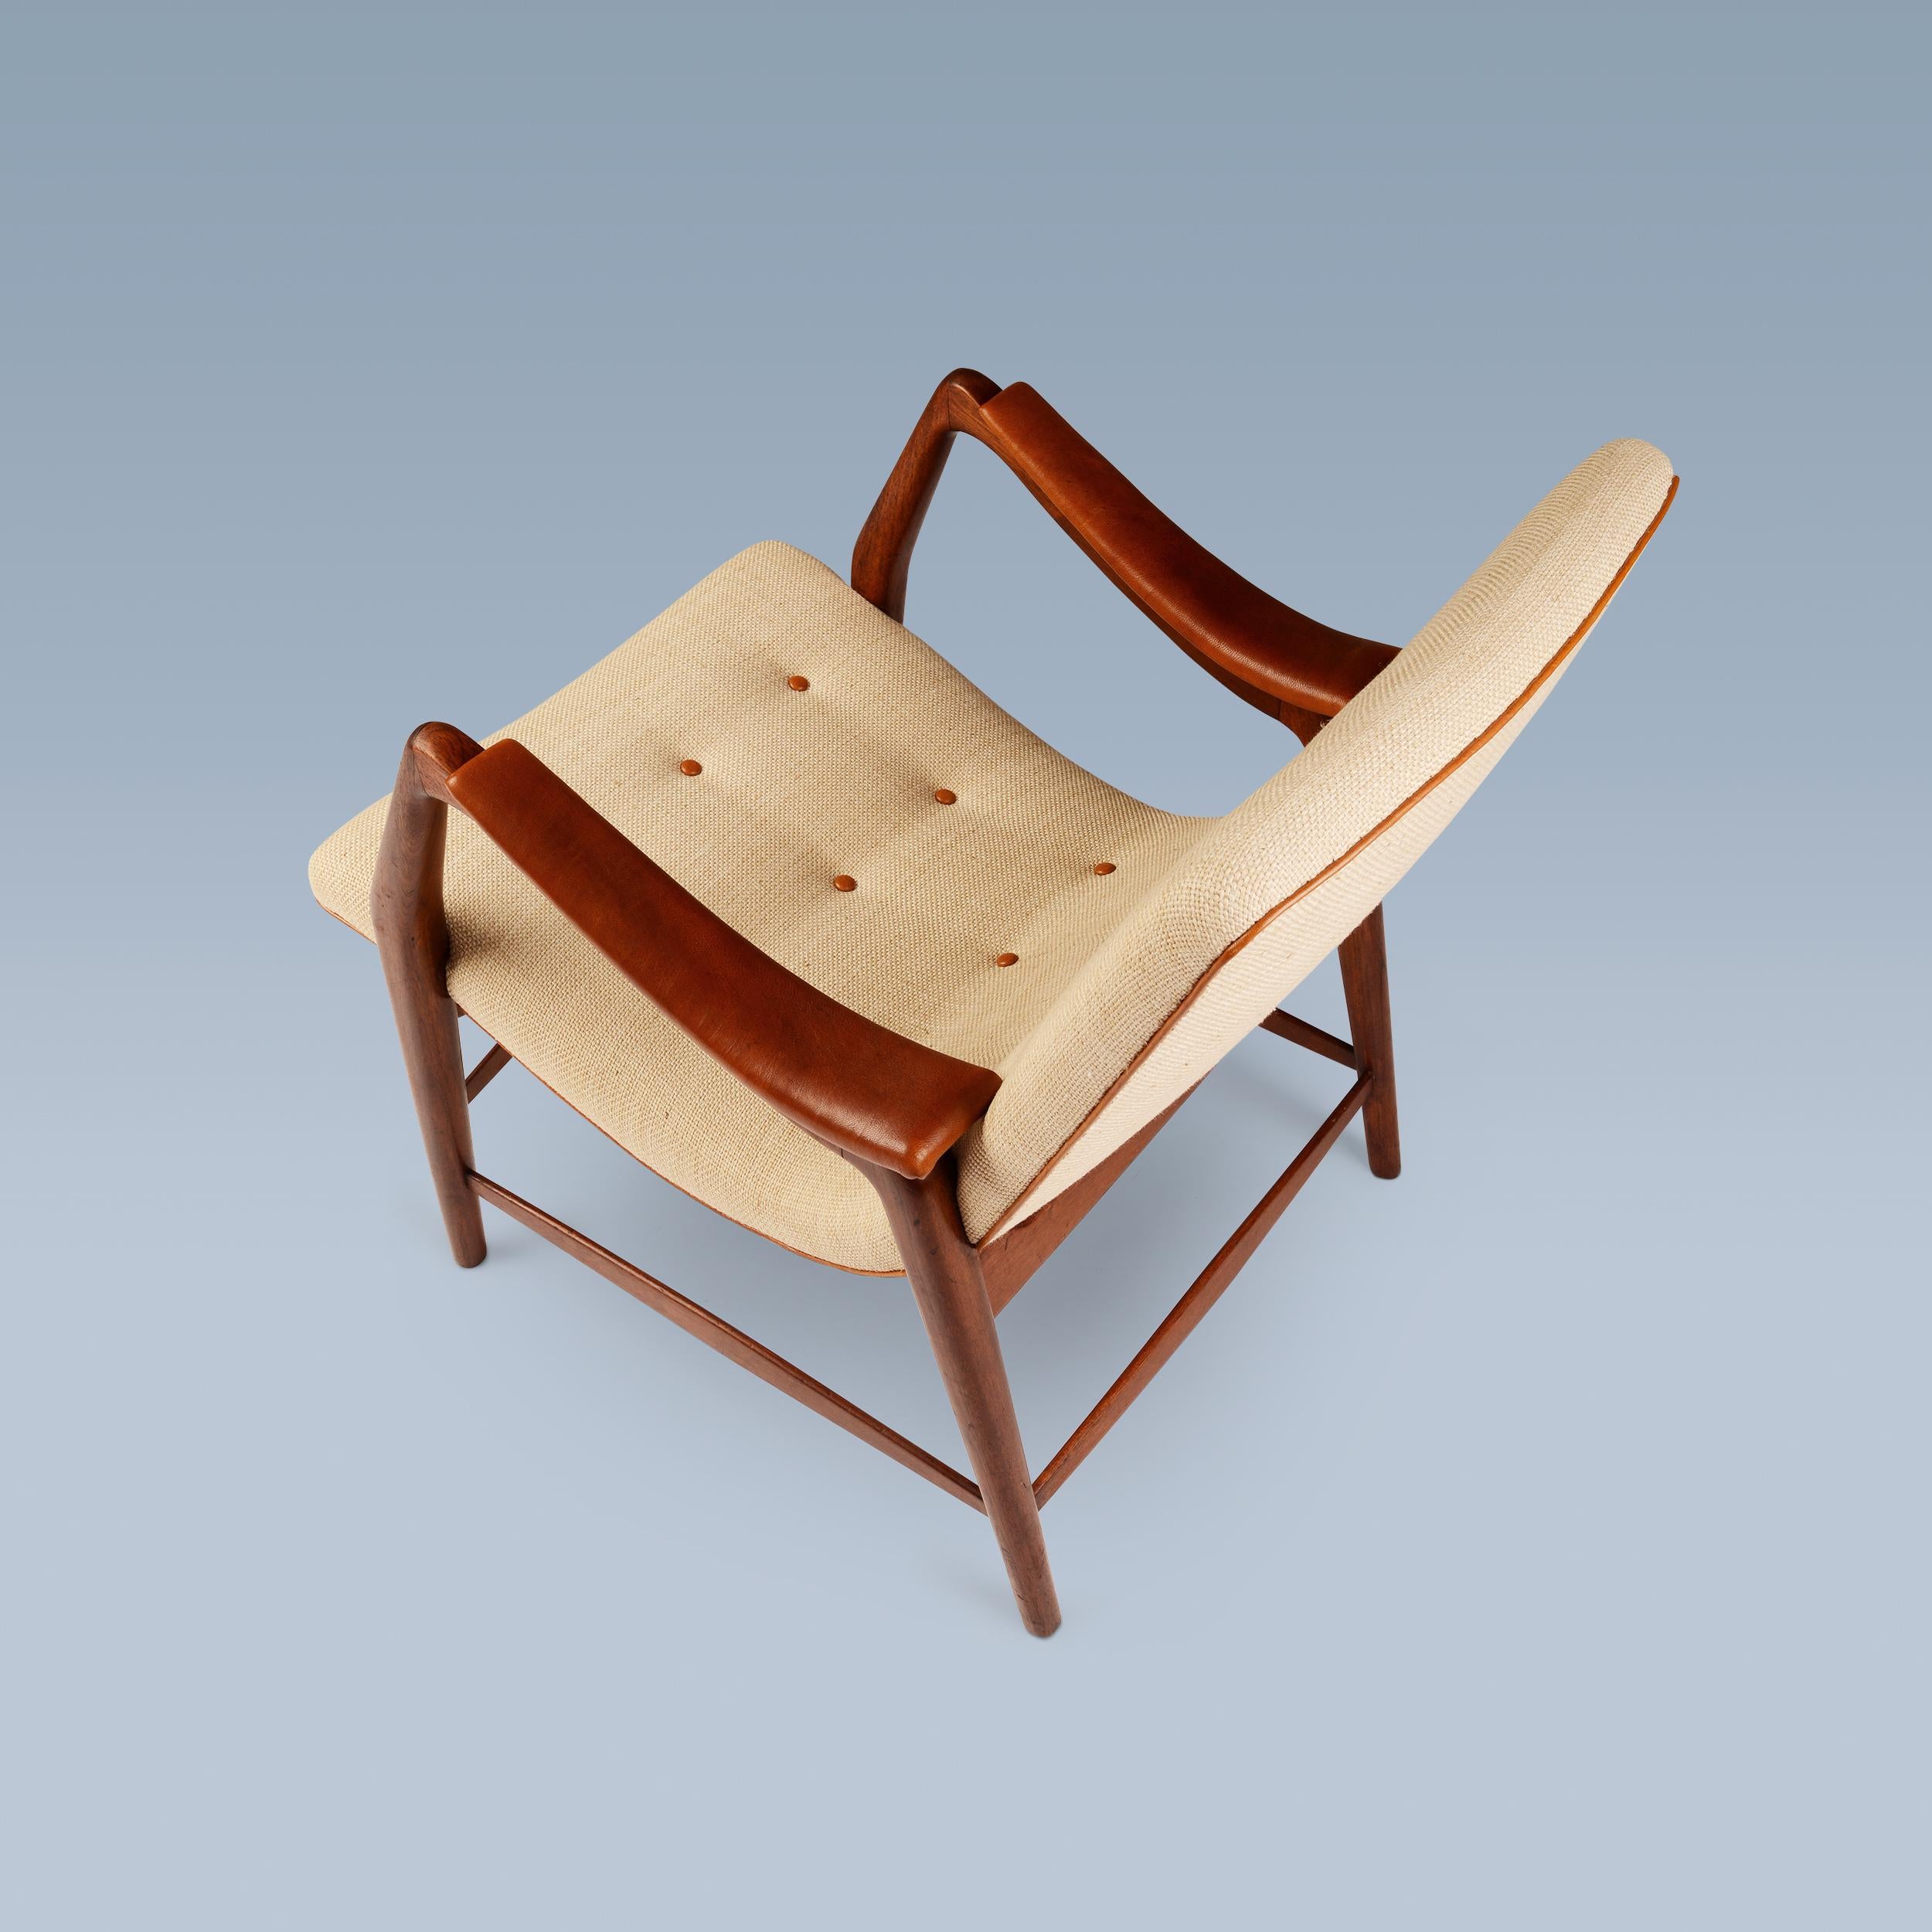 20th Century Teak chair with curvy seat upholstered with light fabric and leather details For Sale